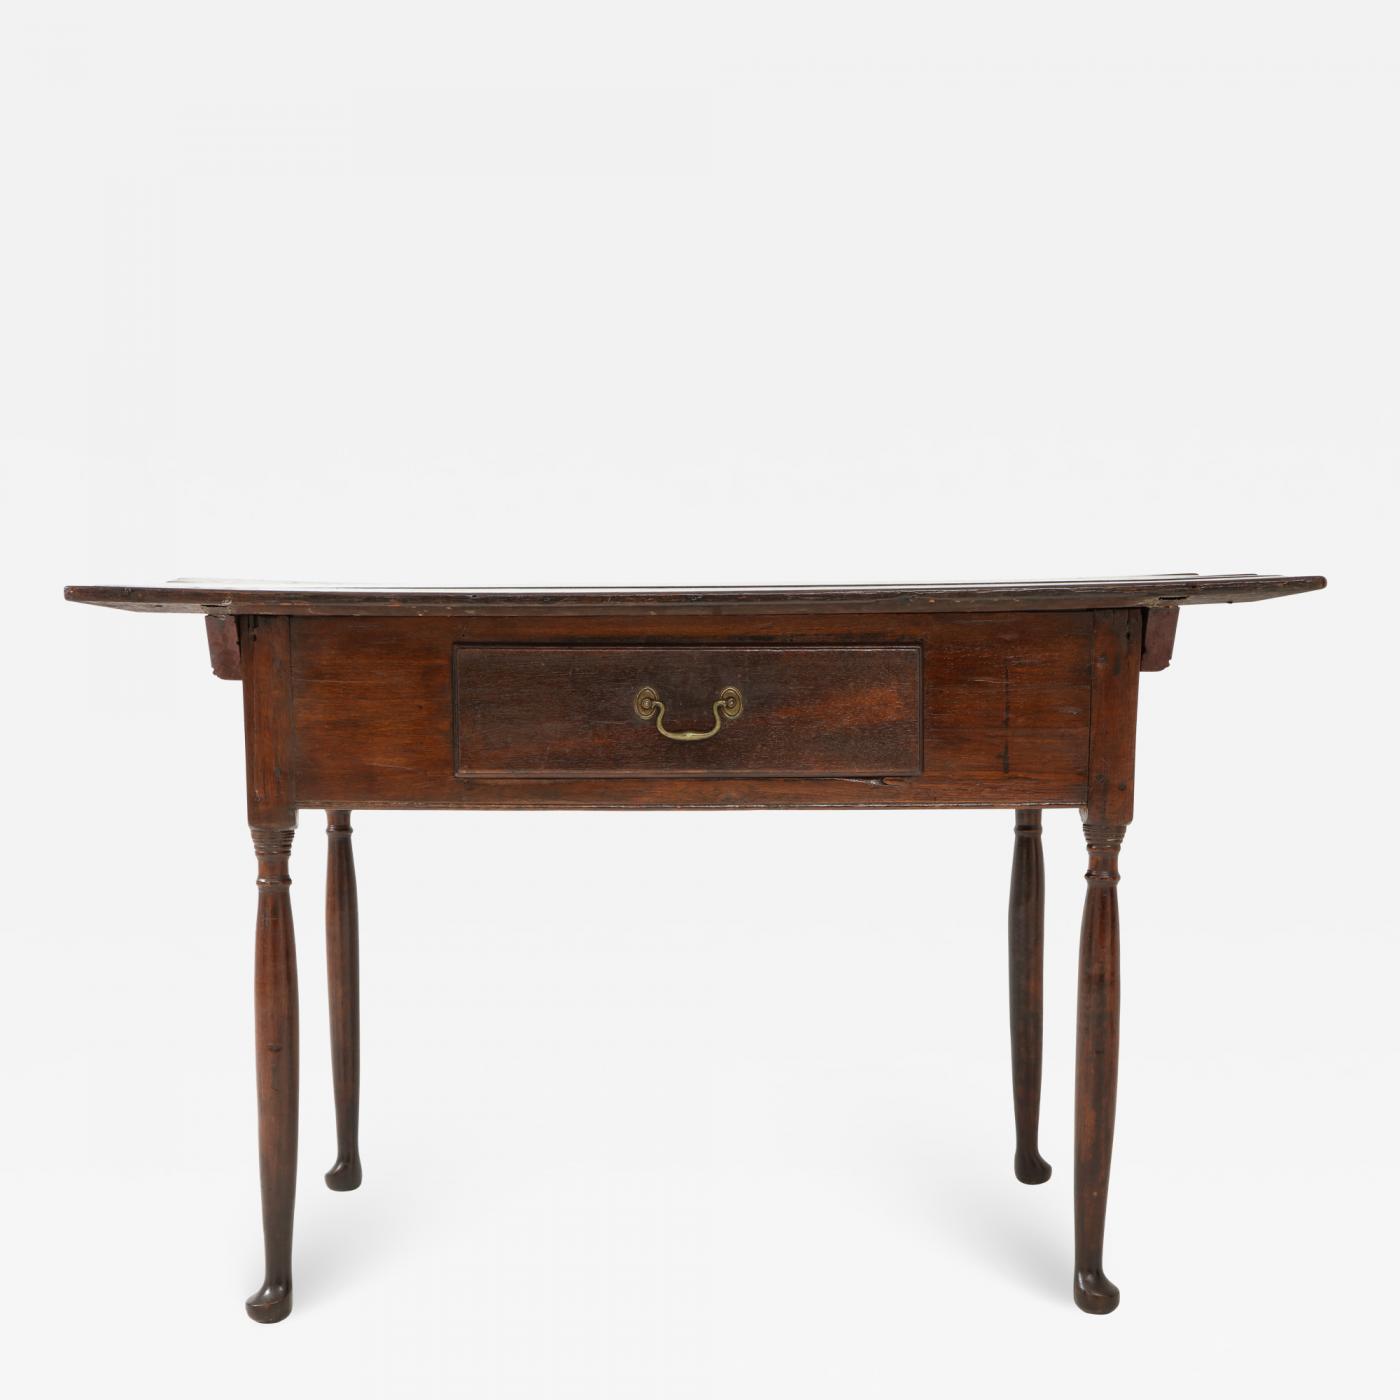 18th C Pennsylvania Dutch Table With Drawer